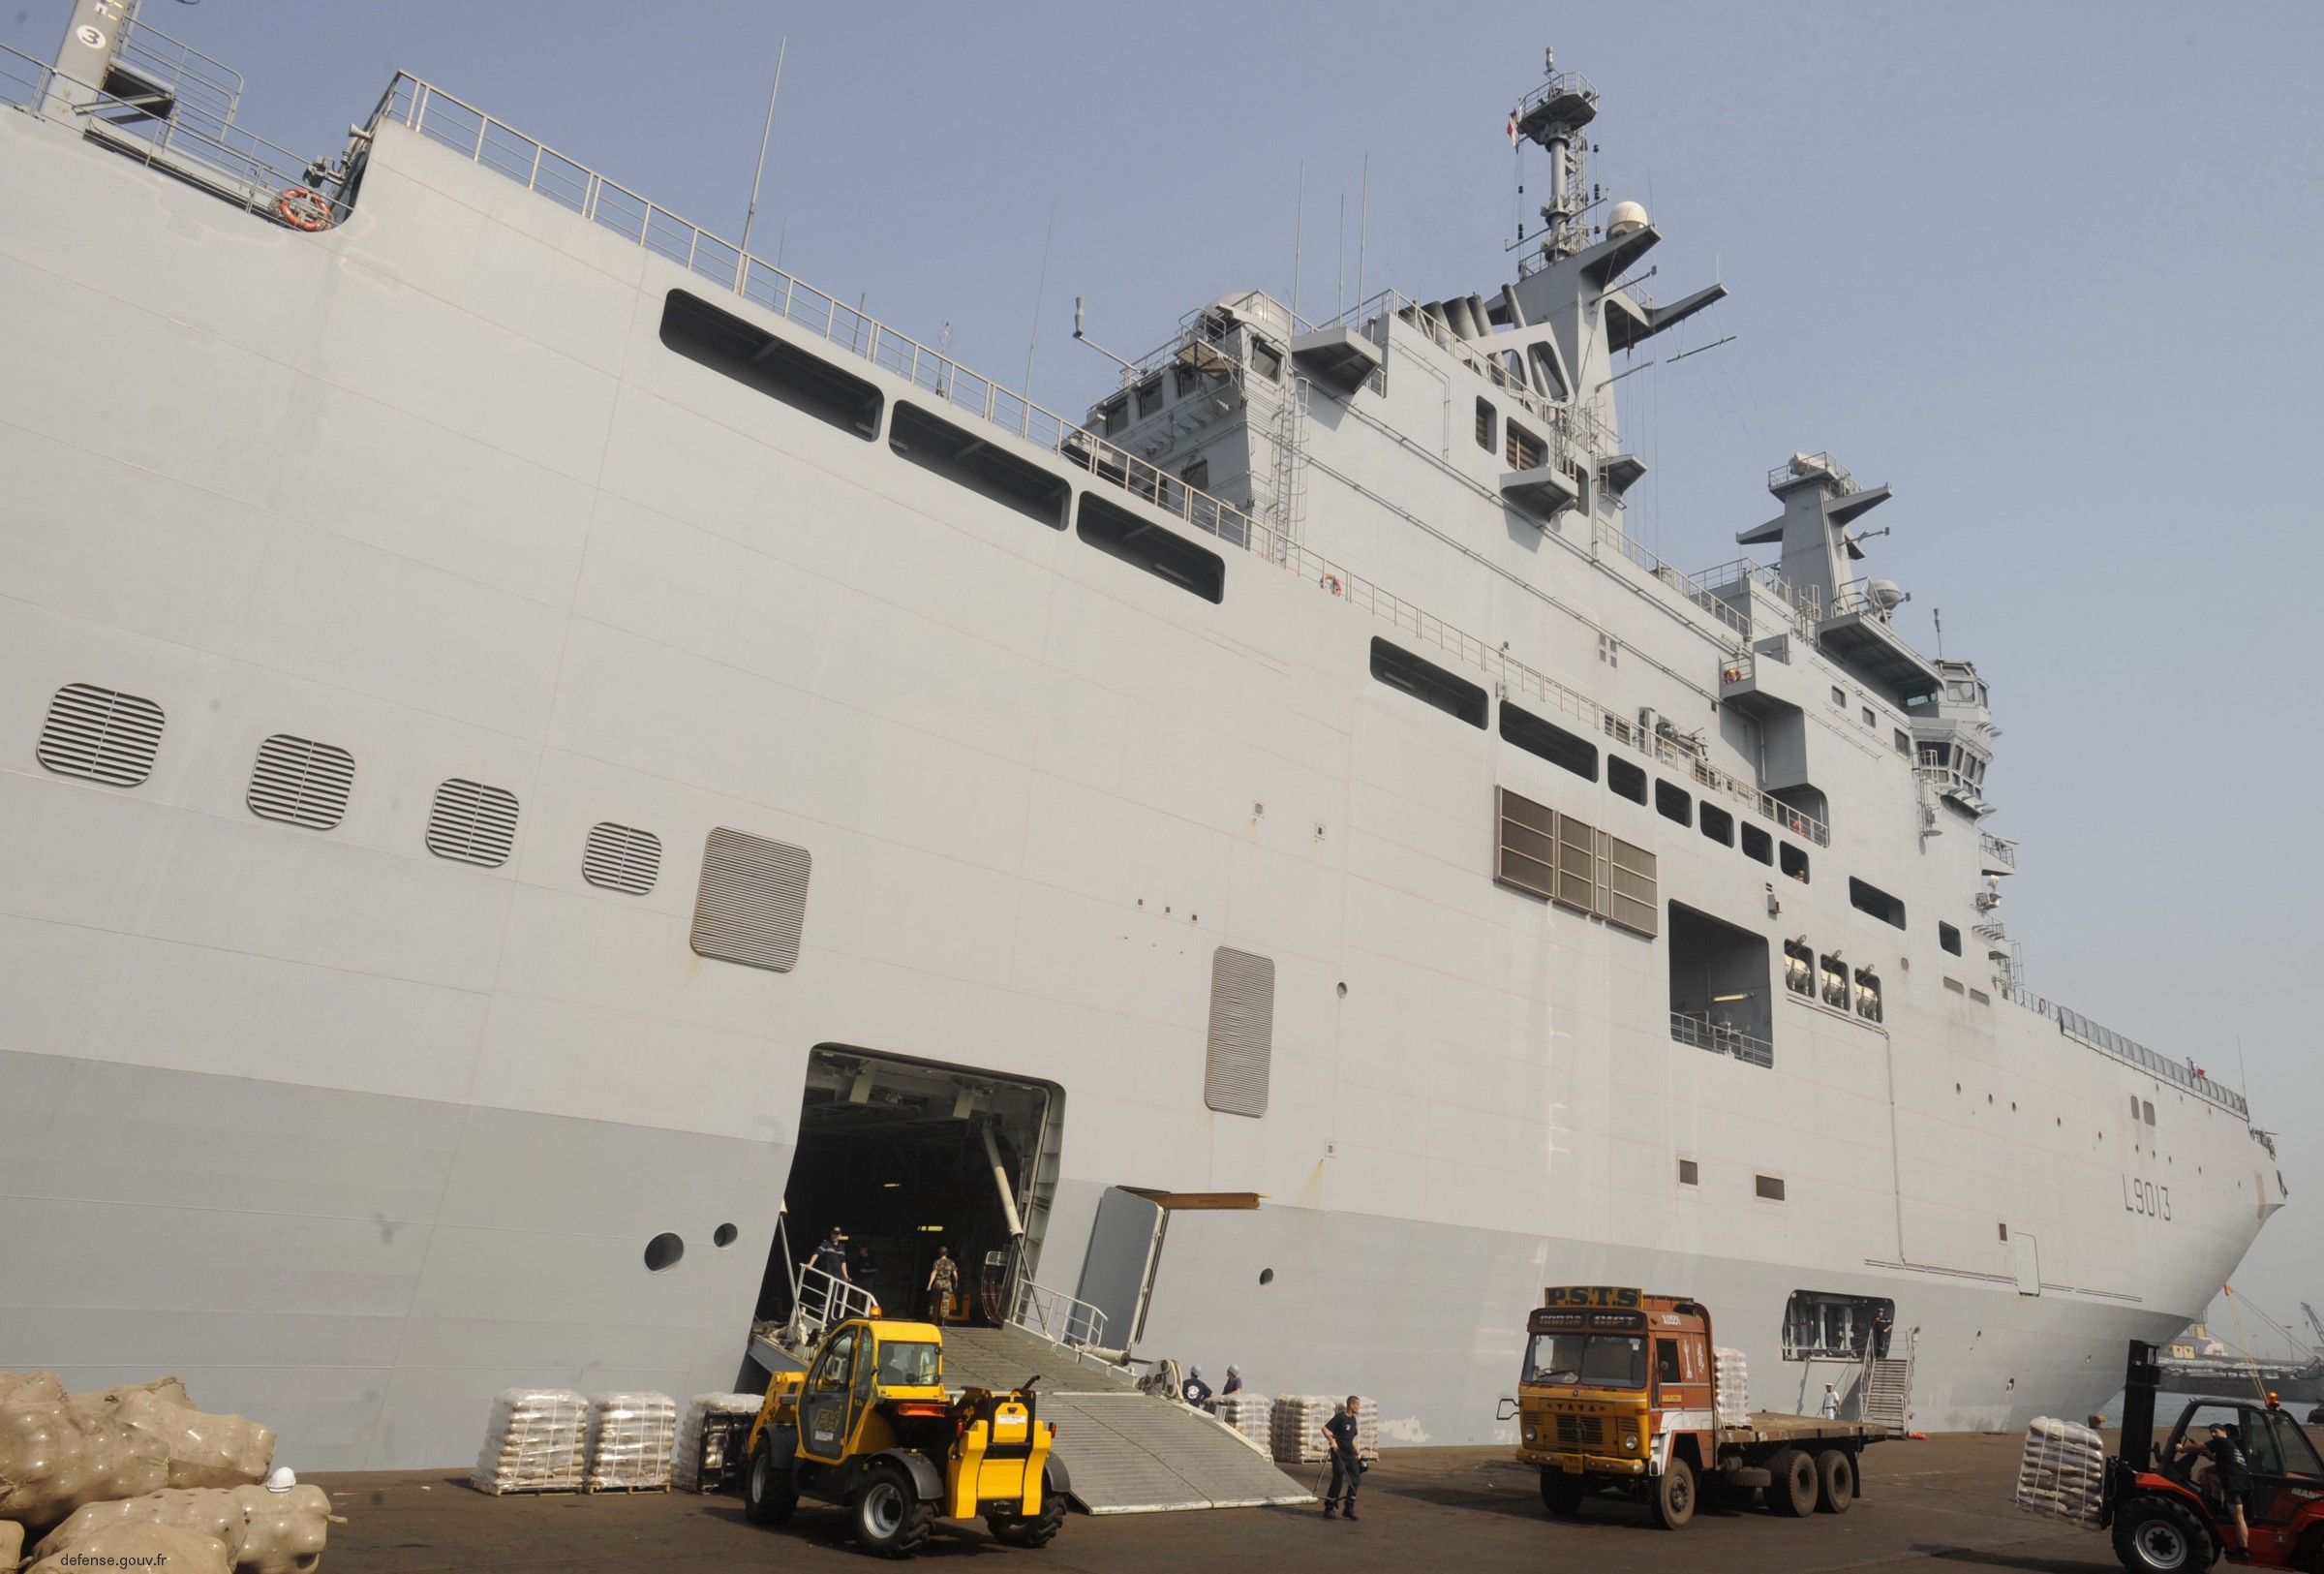 l-9013 fs mistral amphibious assault command ship french navy marine nationale 40